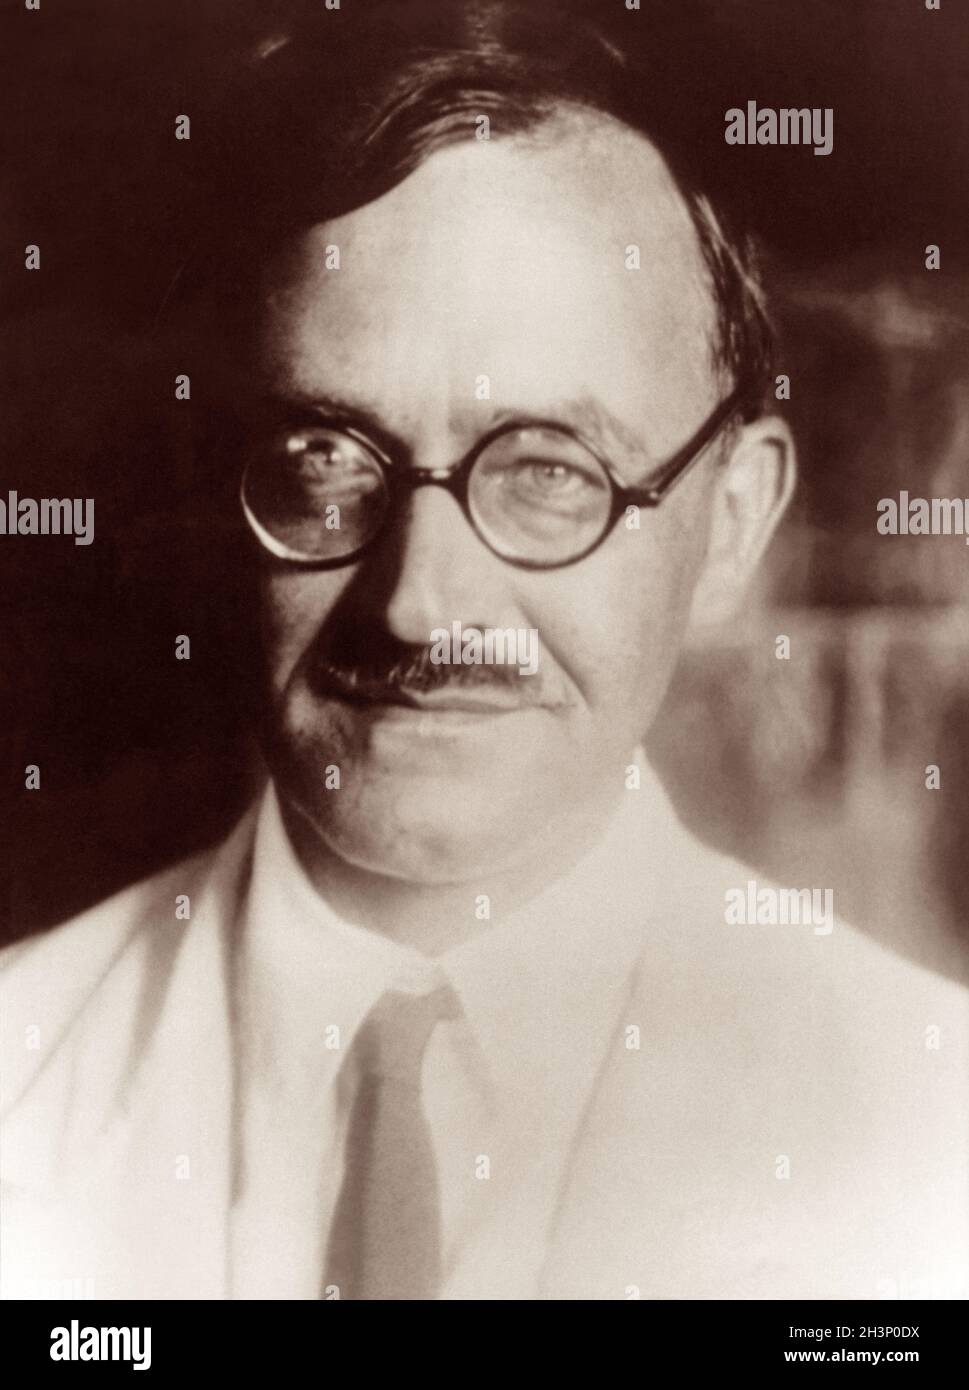 Karl Barth (1886-1968), Swiss Calvinist theologian known for his commentary The Epistle to the Romans, his involvement in the Confessing Church, his authorship of the Barmen Declaration, and his unfinished multi-volume theological summa the Church Dogmatics. (Photo: 1929) Stock Photo